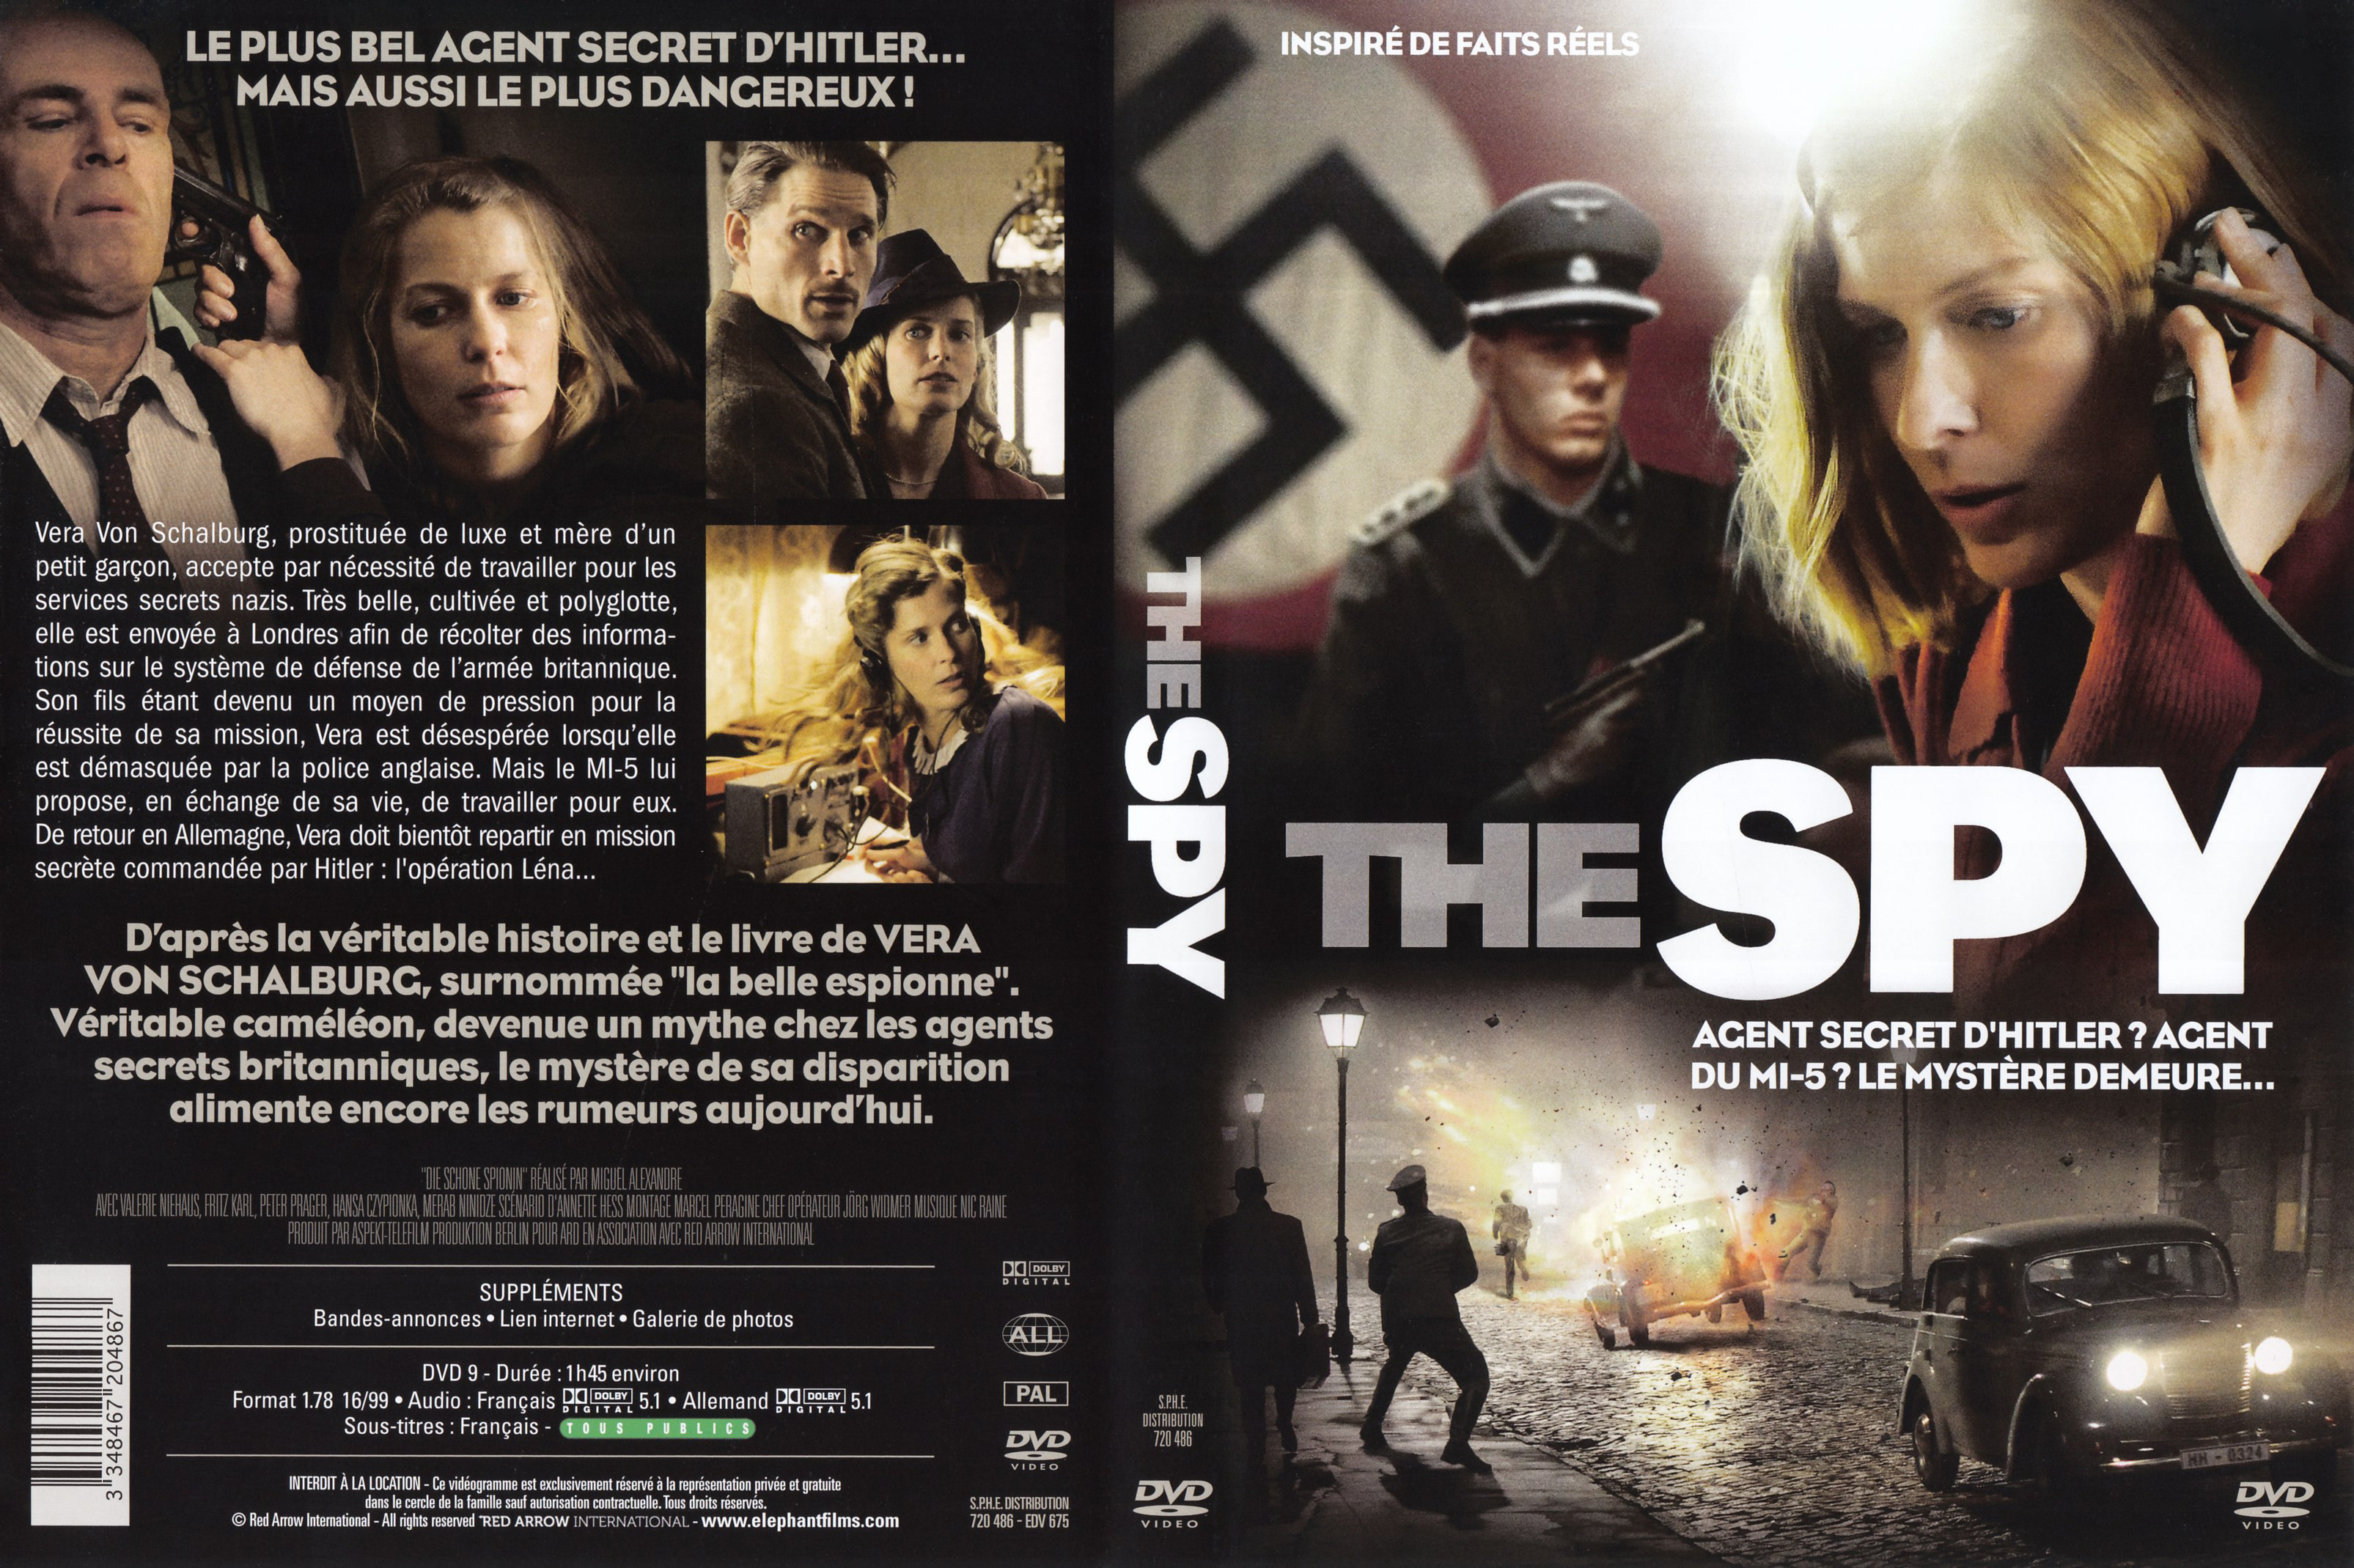 Jaquette DVD The Spy